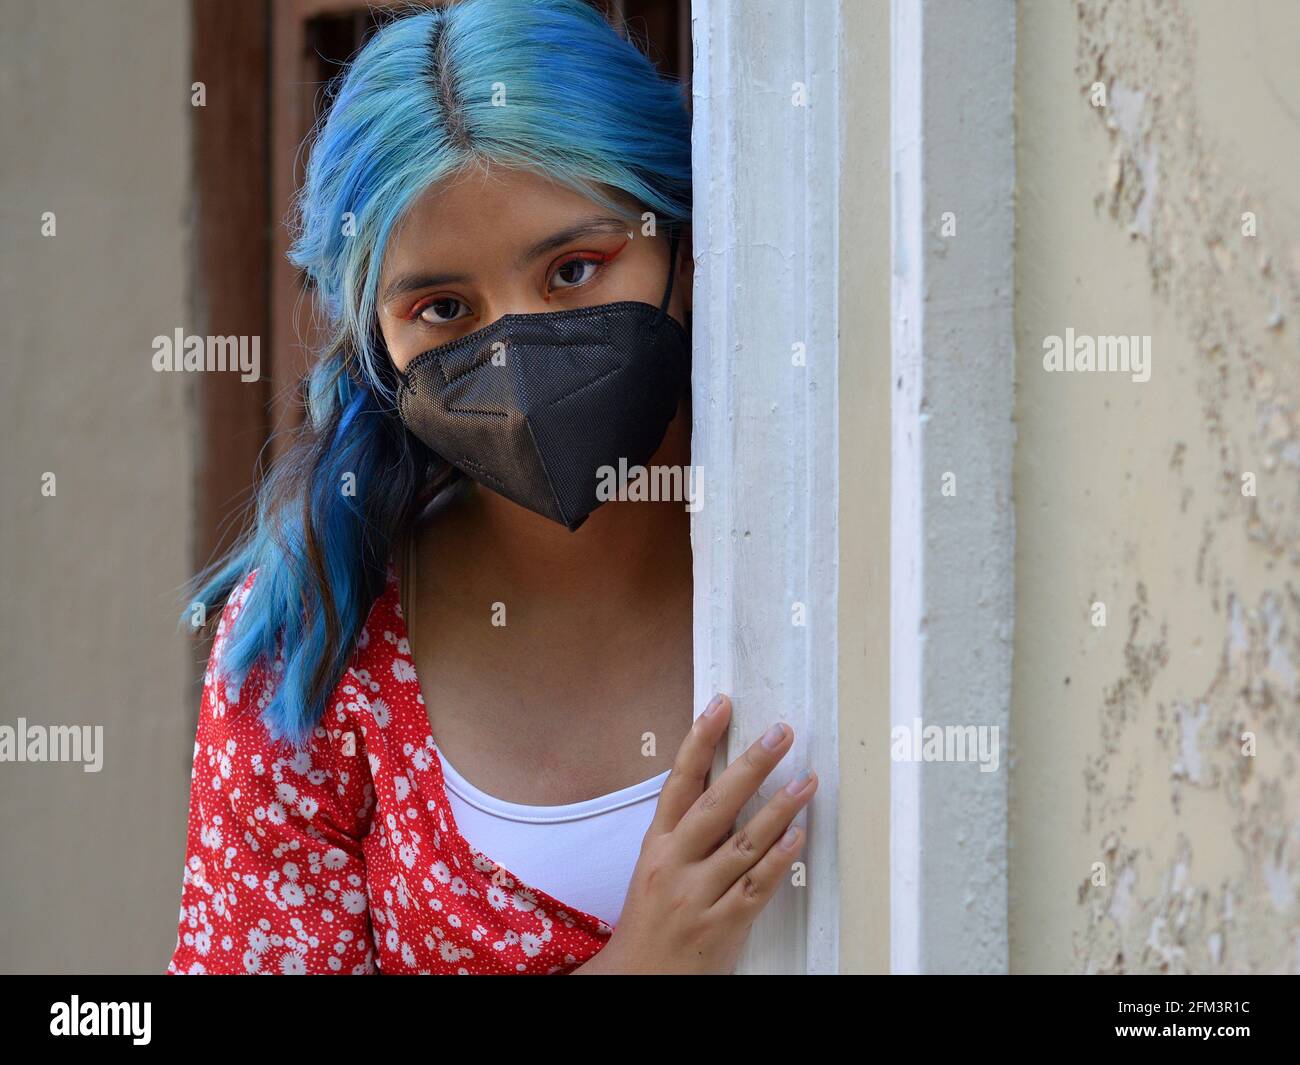 Caucasian latina teen girl with blue dyed long hair and elaborate eye make-up wears a black face mask and peeks around the corner of an entrance door. Stock Photo